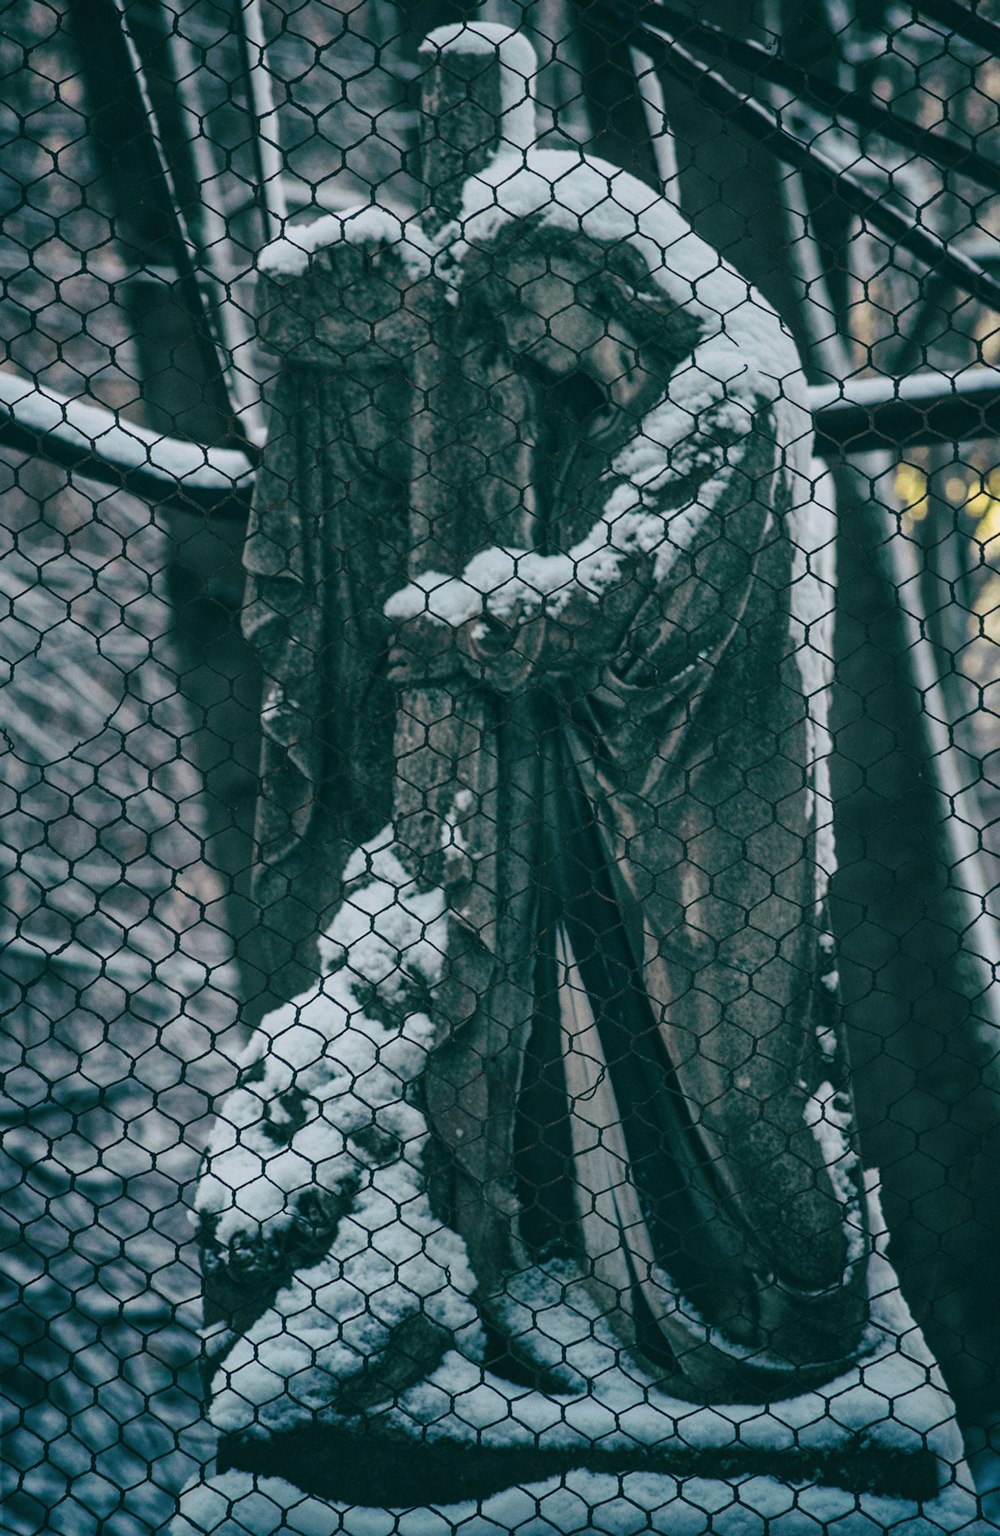 a statue of a man standing behind a chain link fence